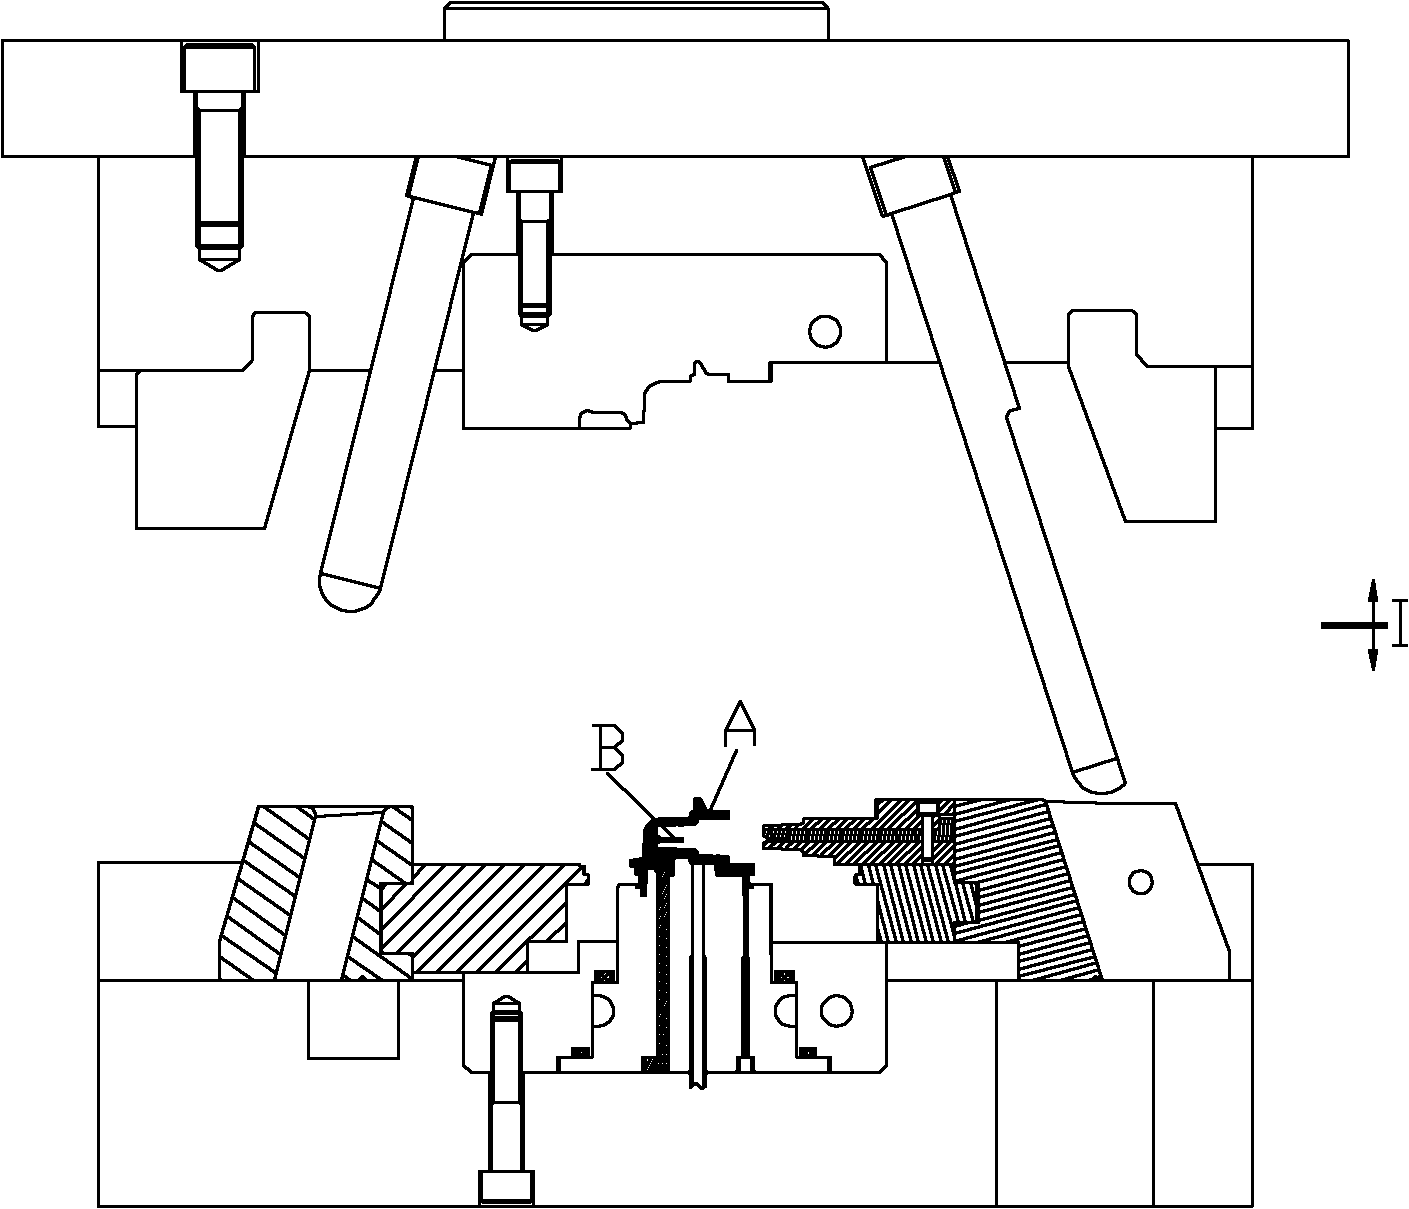 Double-mould-opening and double-core-pulling mechanism